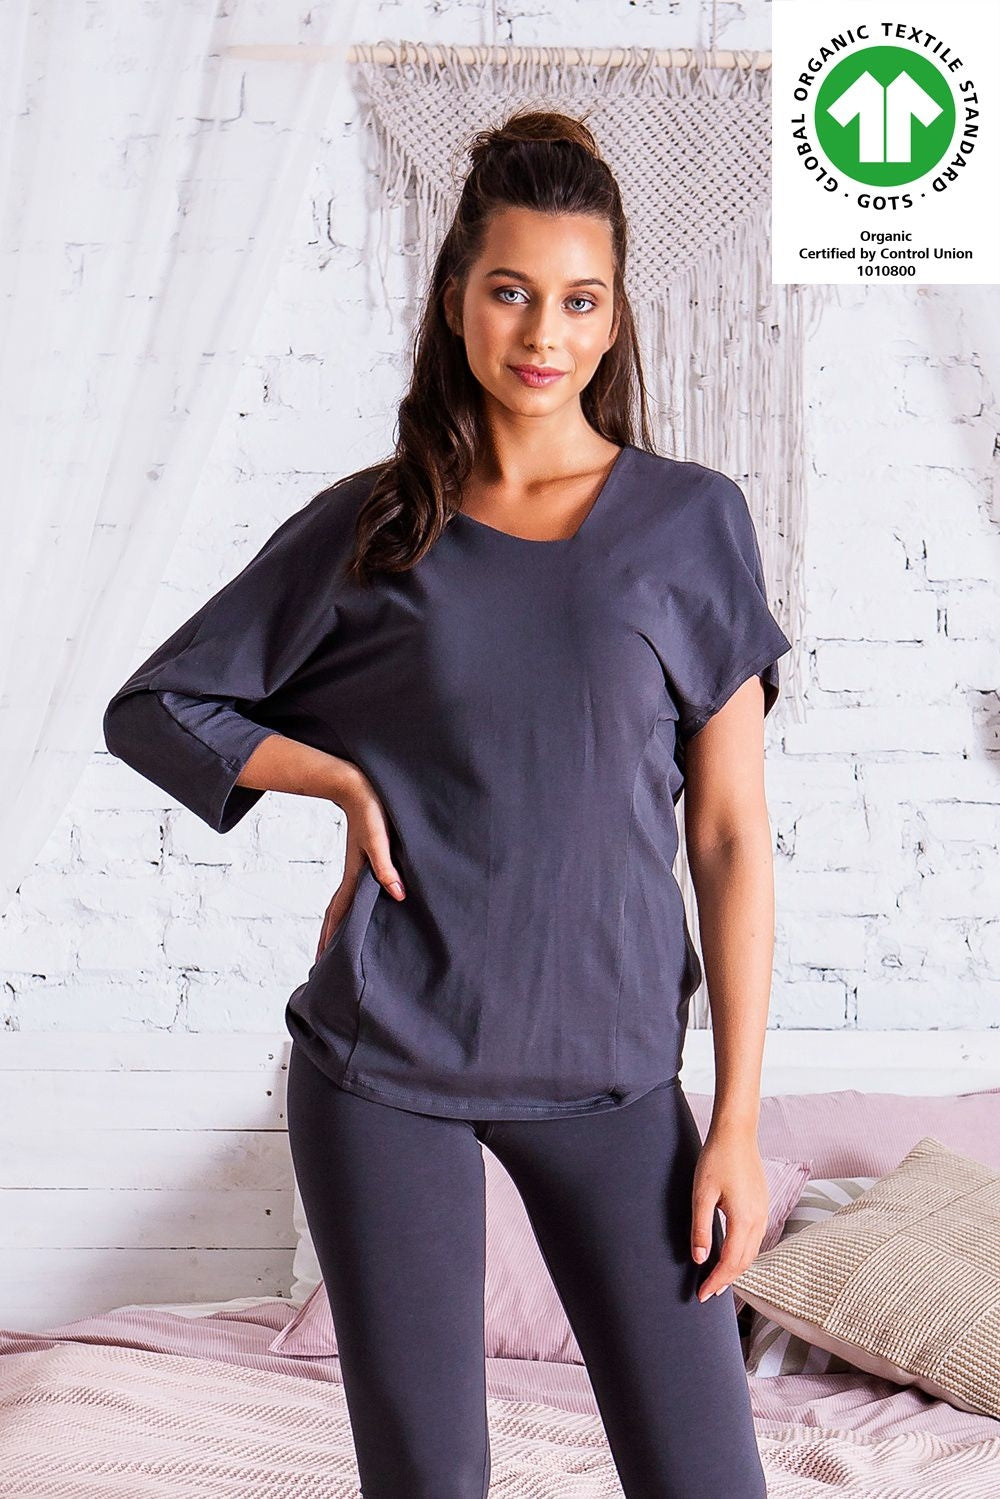 Organic cotton top with asymmetrical shape in grey colour